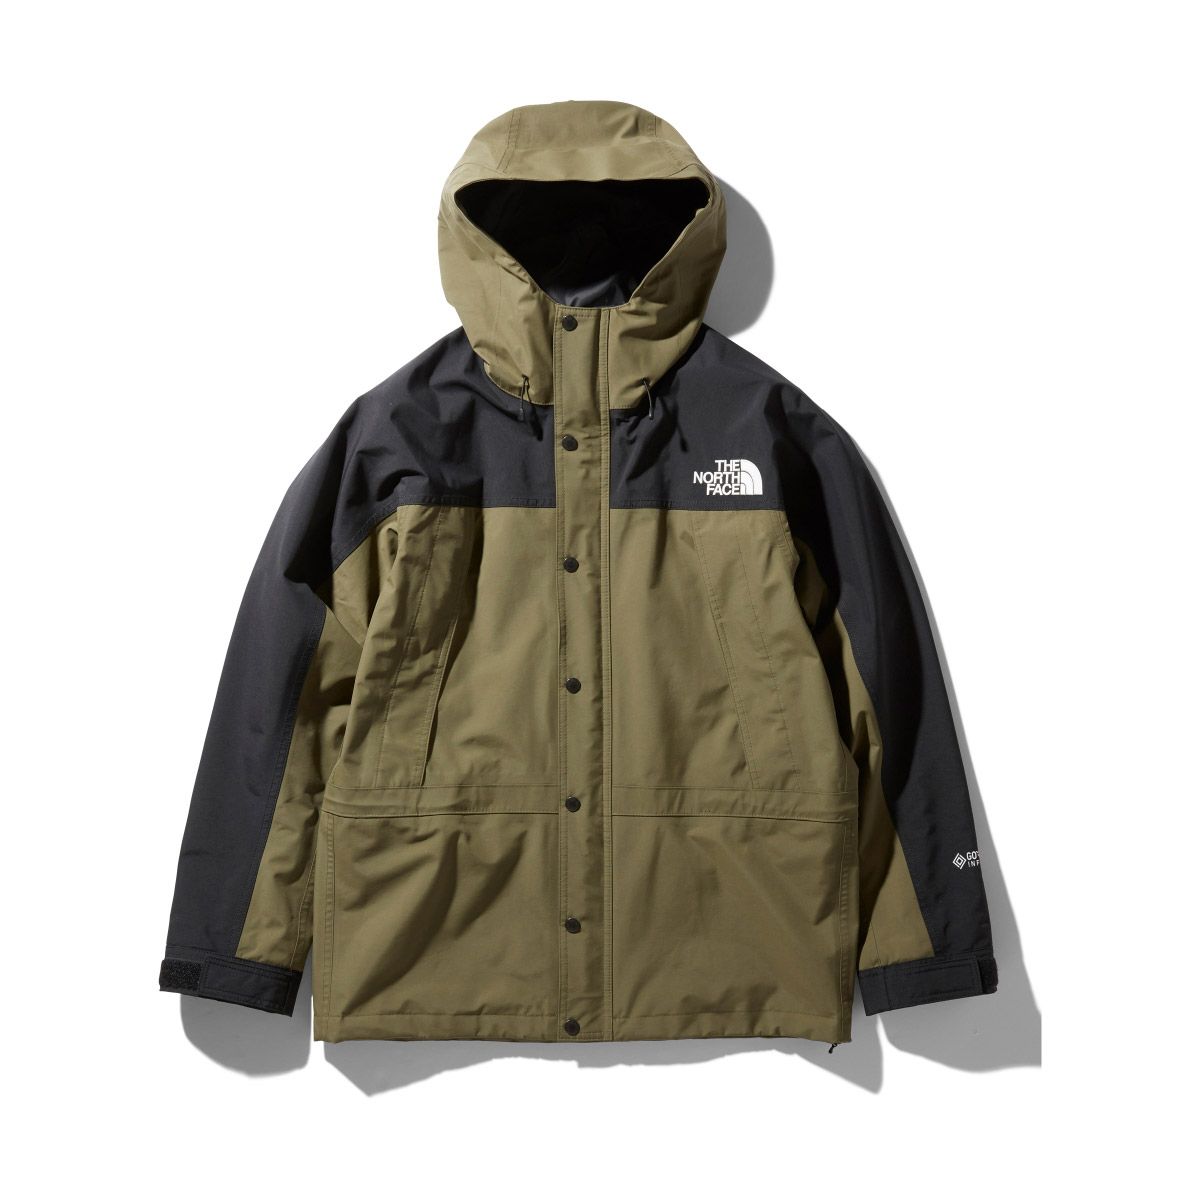 Very Goods | THE NORTH FACE MOUNTAIN LIGHT JACKET BURNT OLIVE 20SS-S